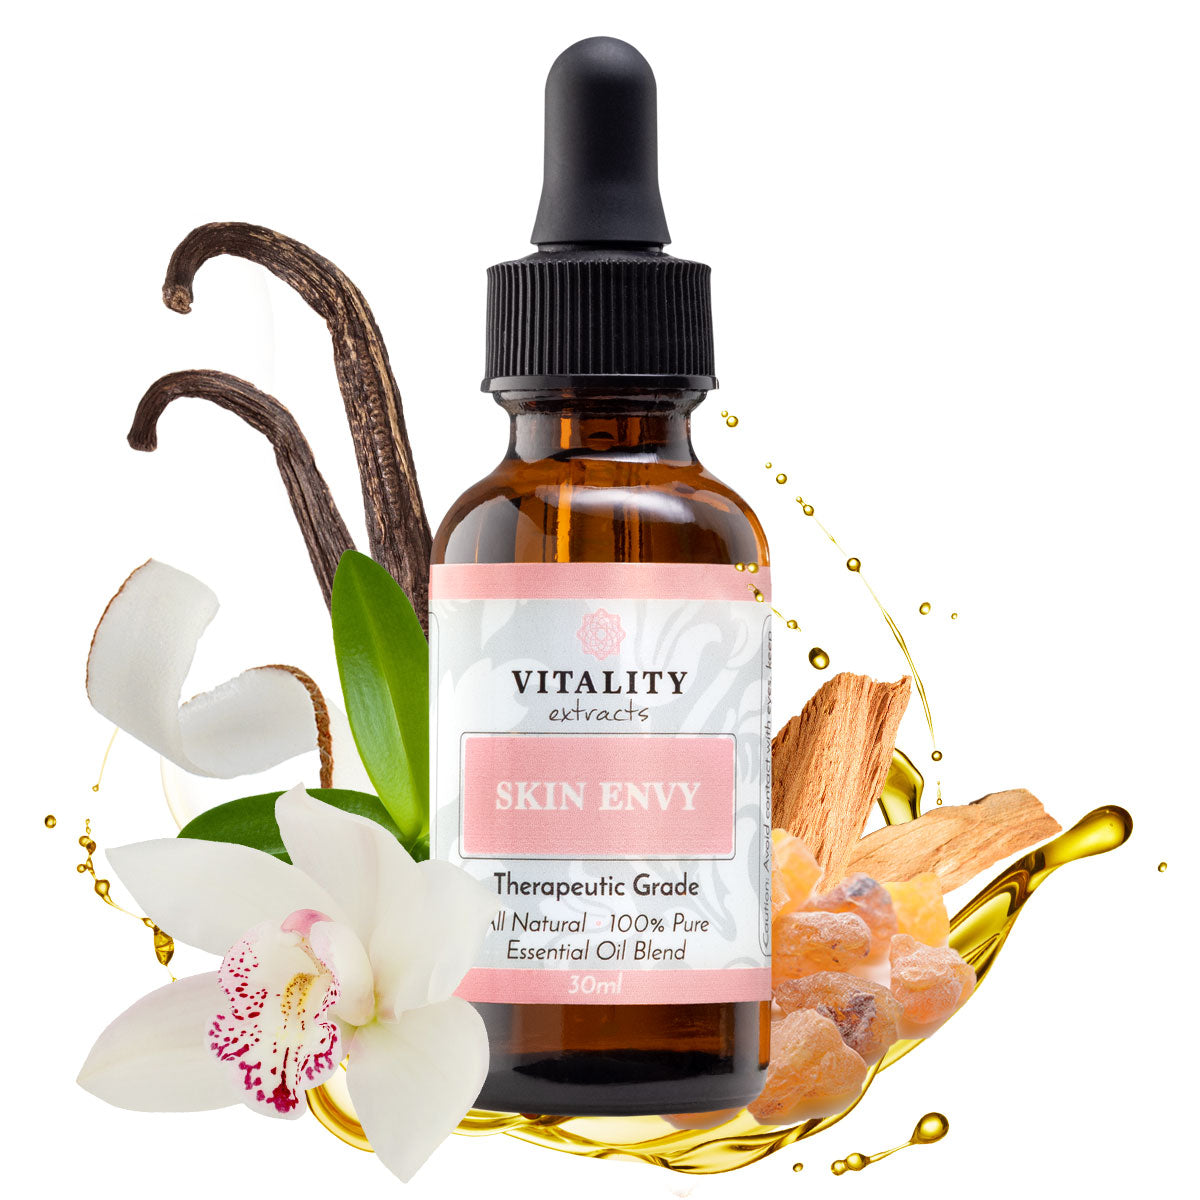 Vitality Skin Envy Review - Does it Actually Work?